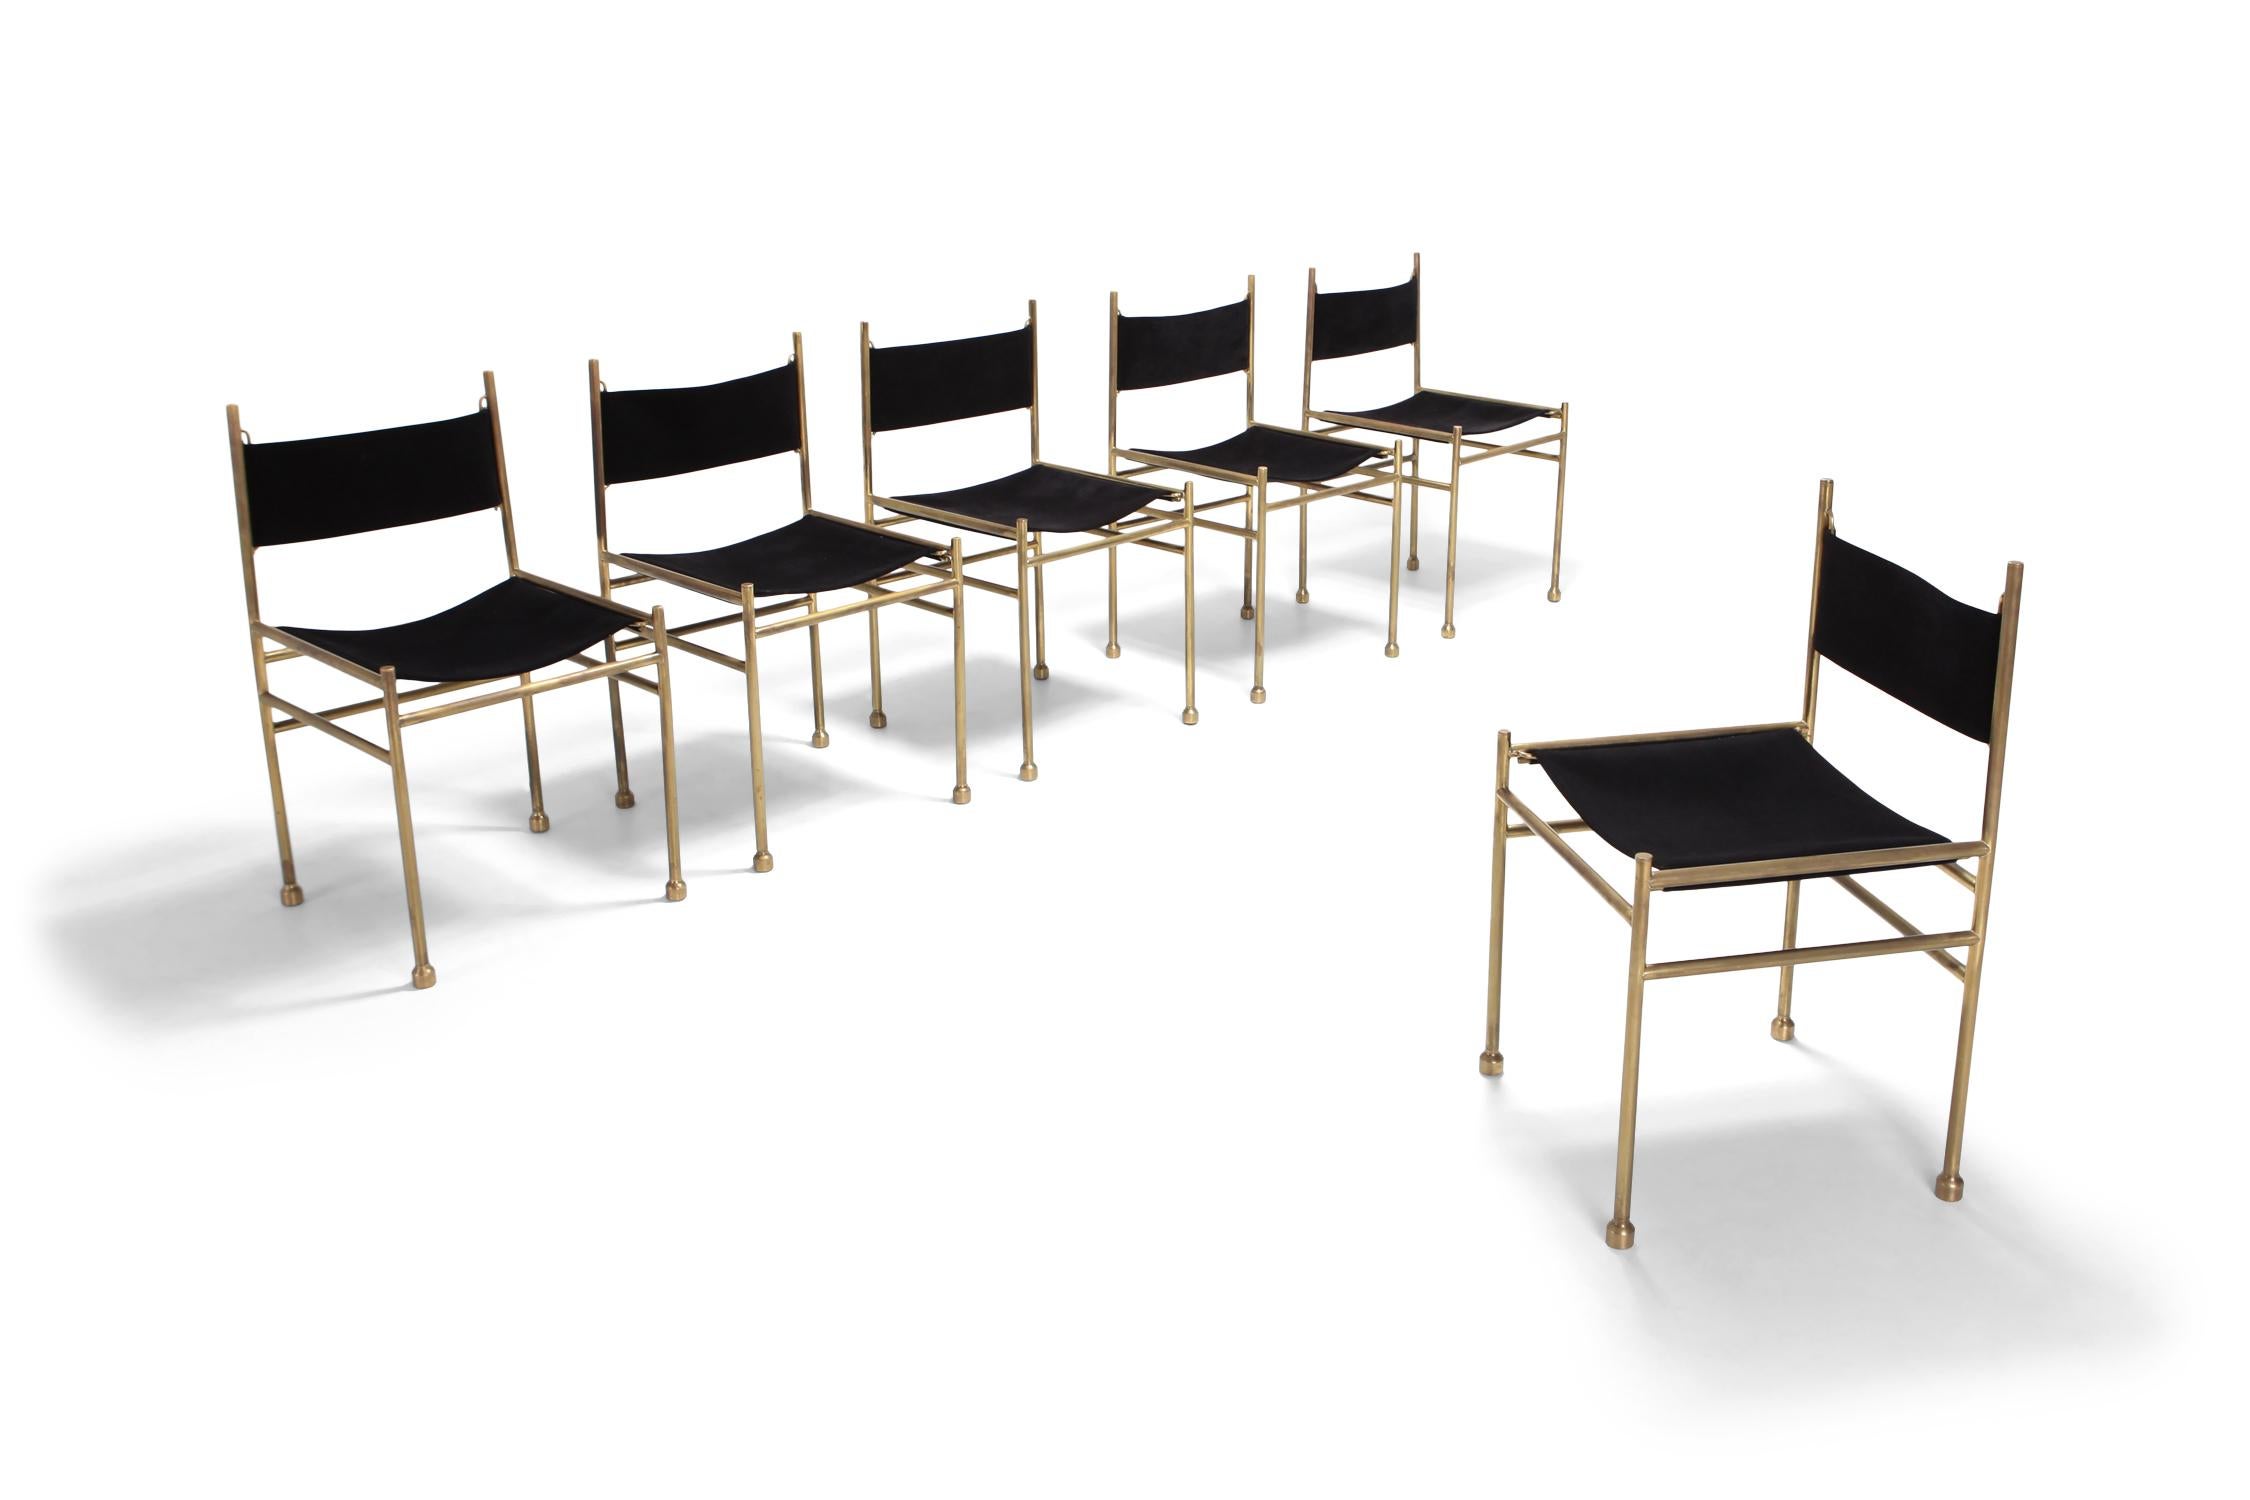 Hollywood Regency dining chairs in solid brass and with velvet seating by Luciano Frigerio, set of six.


Frequent visits to prestigious craftsmen’s studios like Canturine, where he often met Masters like Gio' Ponti, Franco Albini, Carlo de Carli